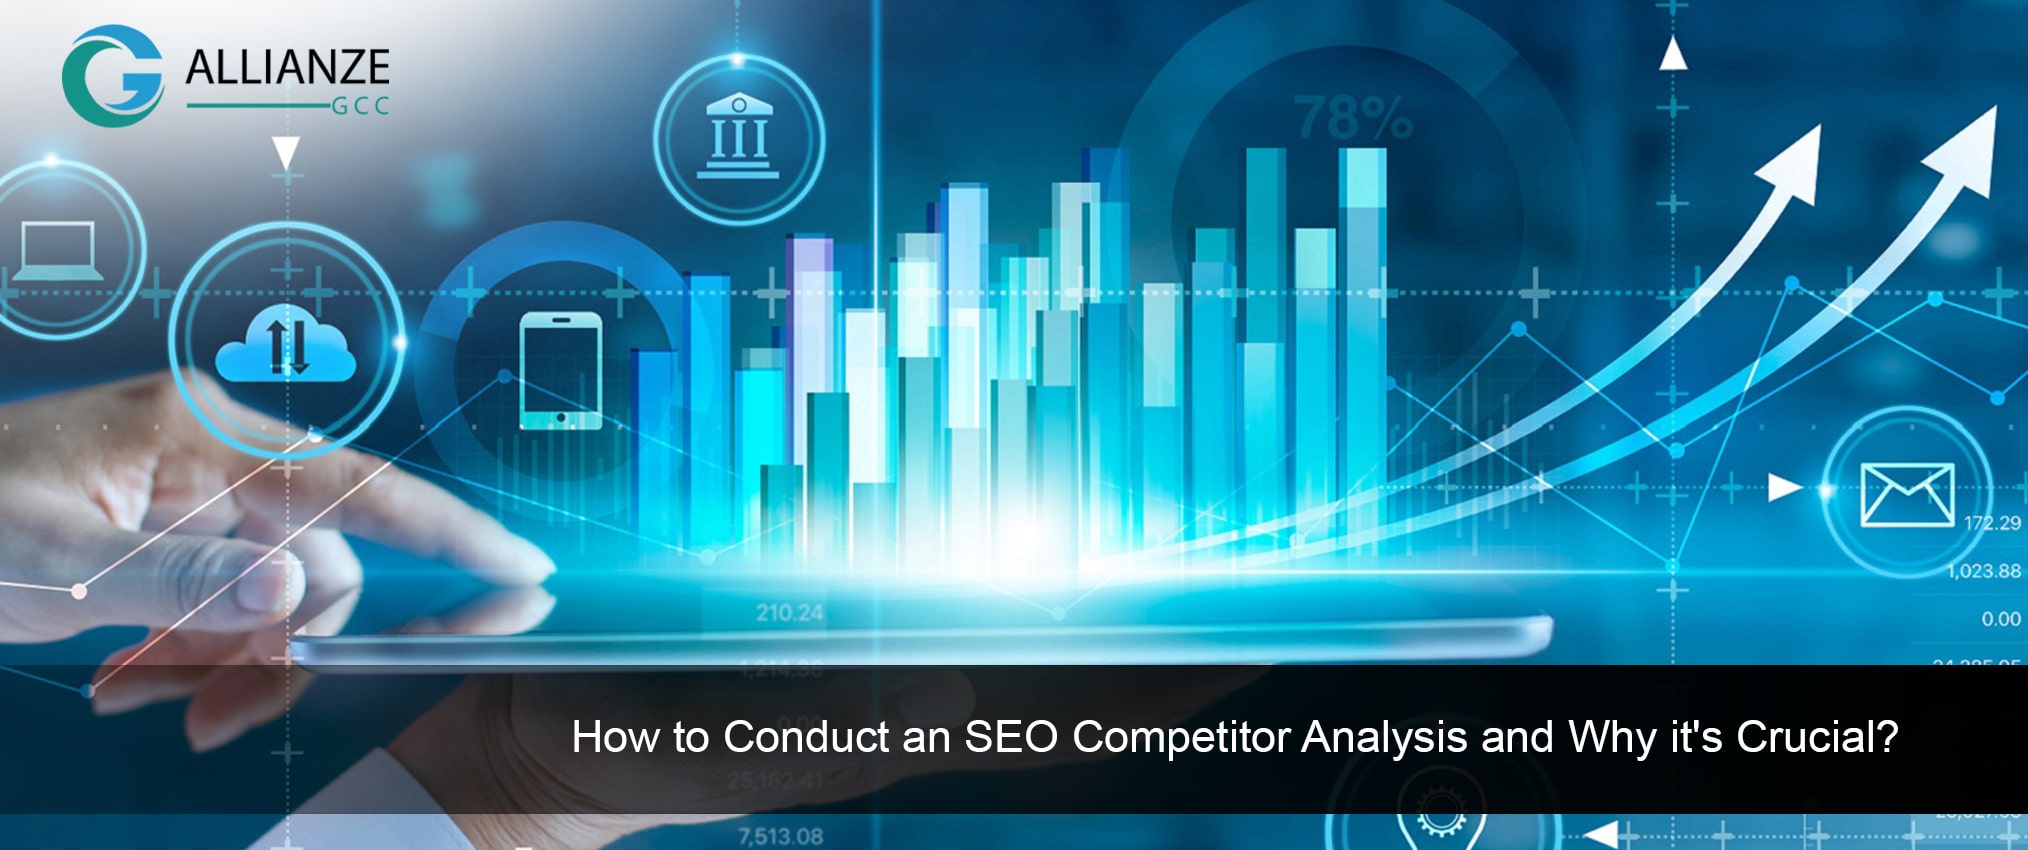 How to Conduct an SEO Competitor Analysis and Why It’s Crucial?